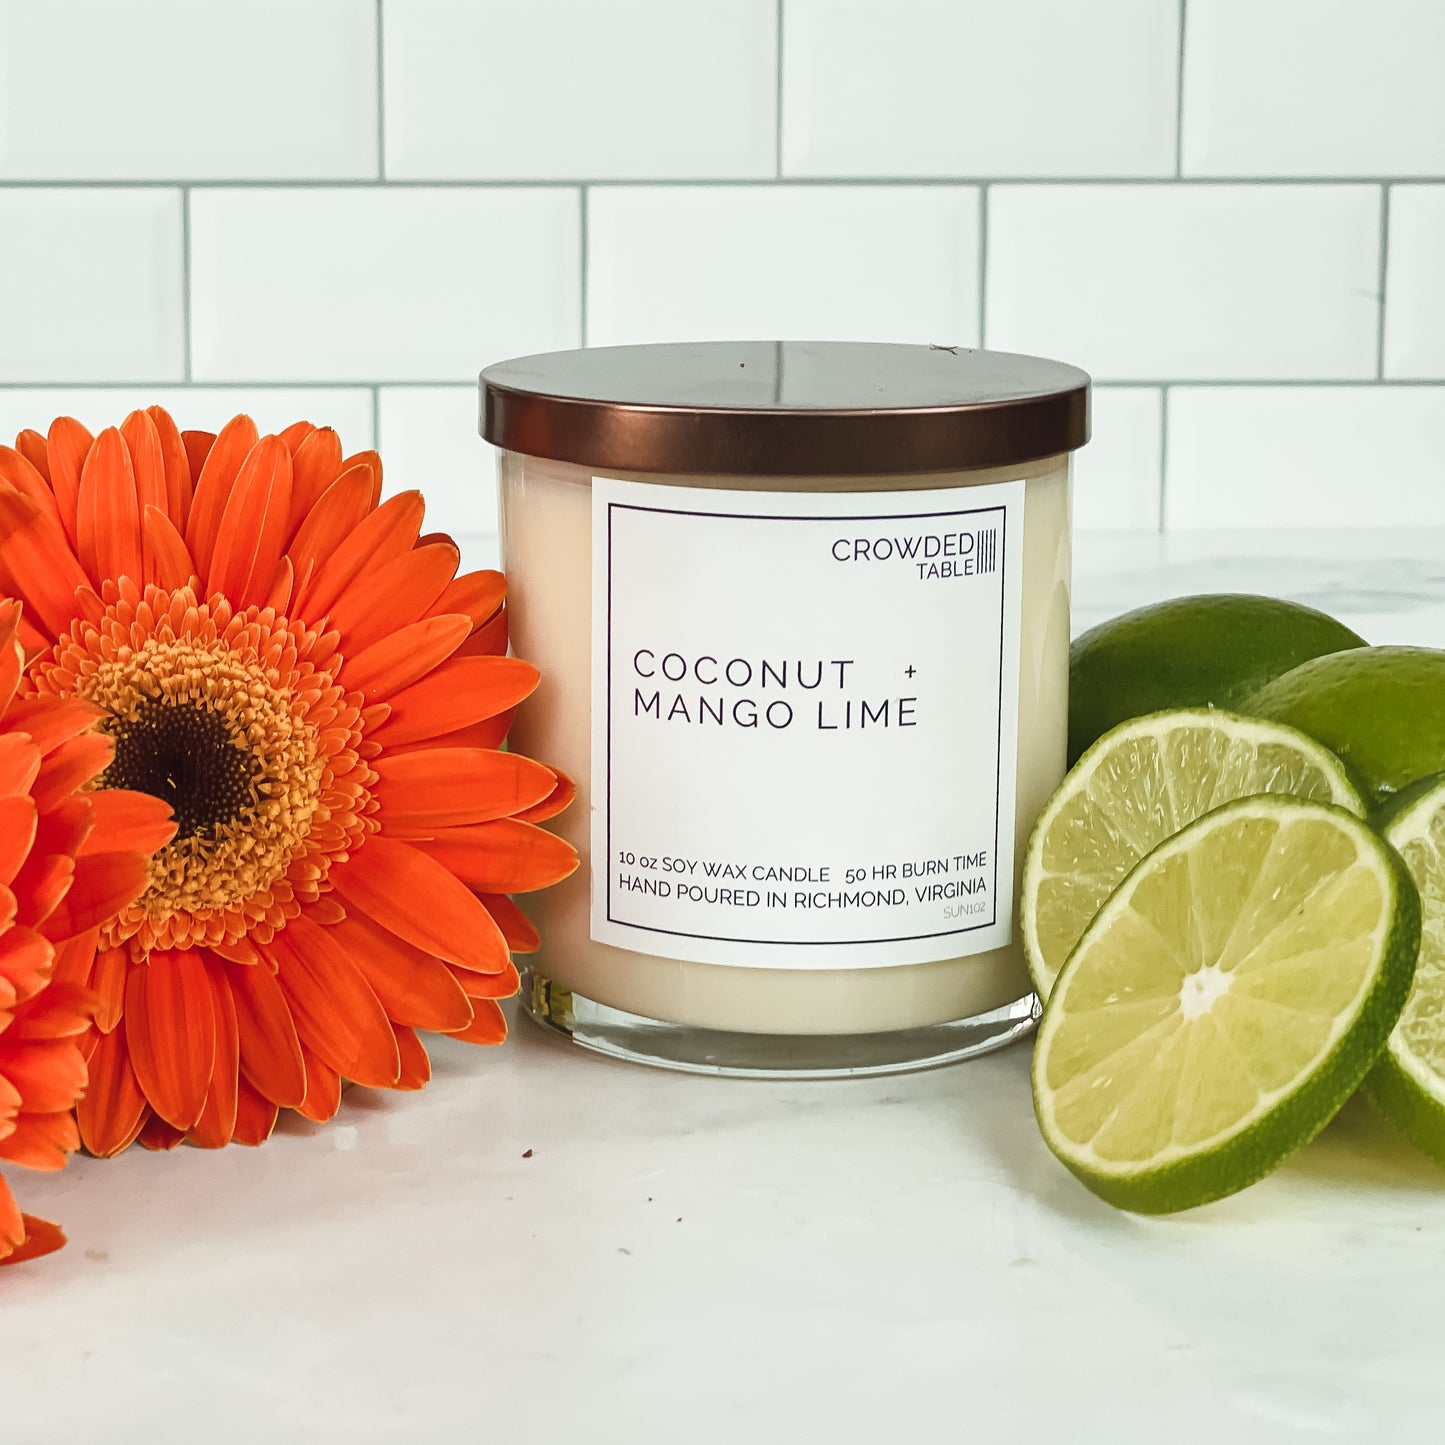 Coconut + Mango Lime 10 oz. Pure Soy Wax Candle